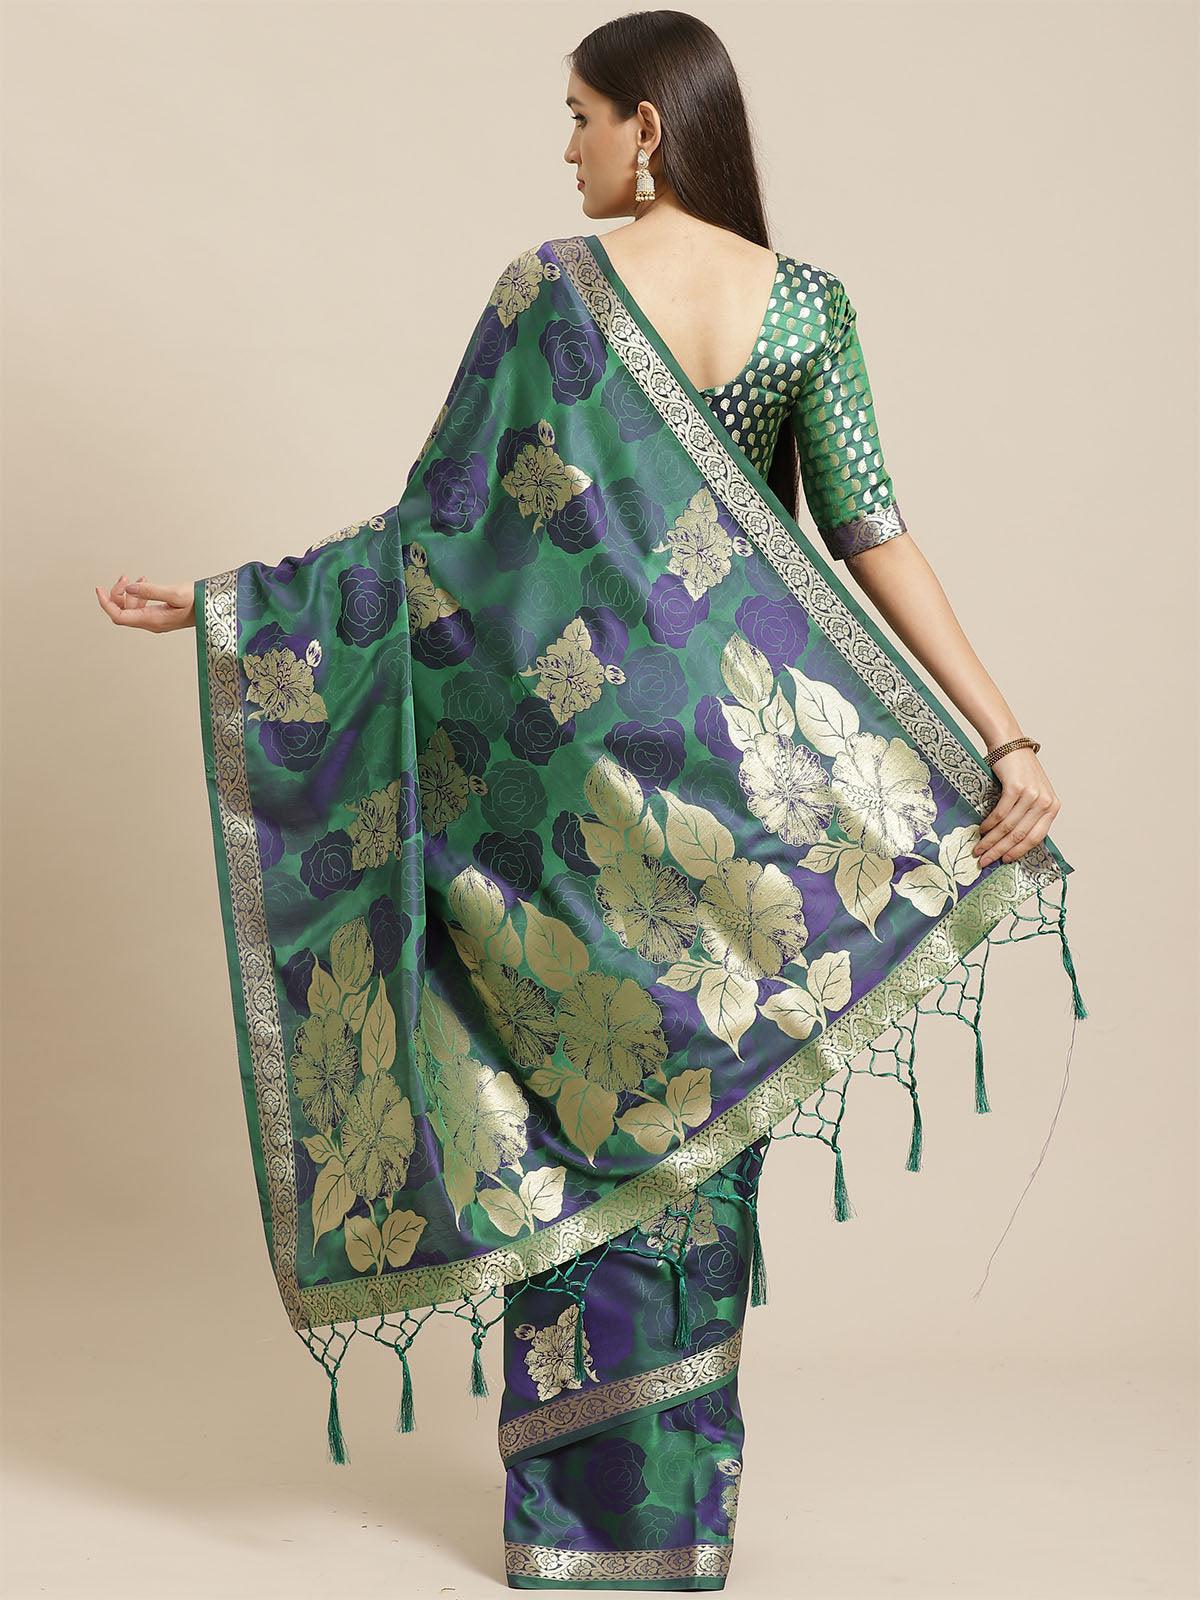 Women's Green Festive Pure Satin Woven Saree With Unstitched Blouse - Odette